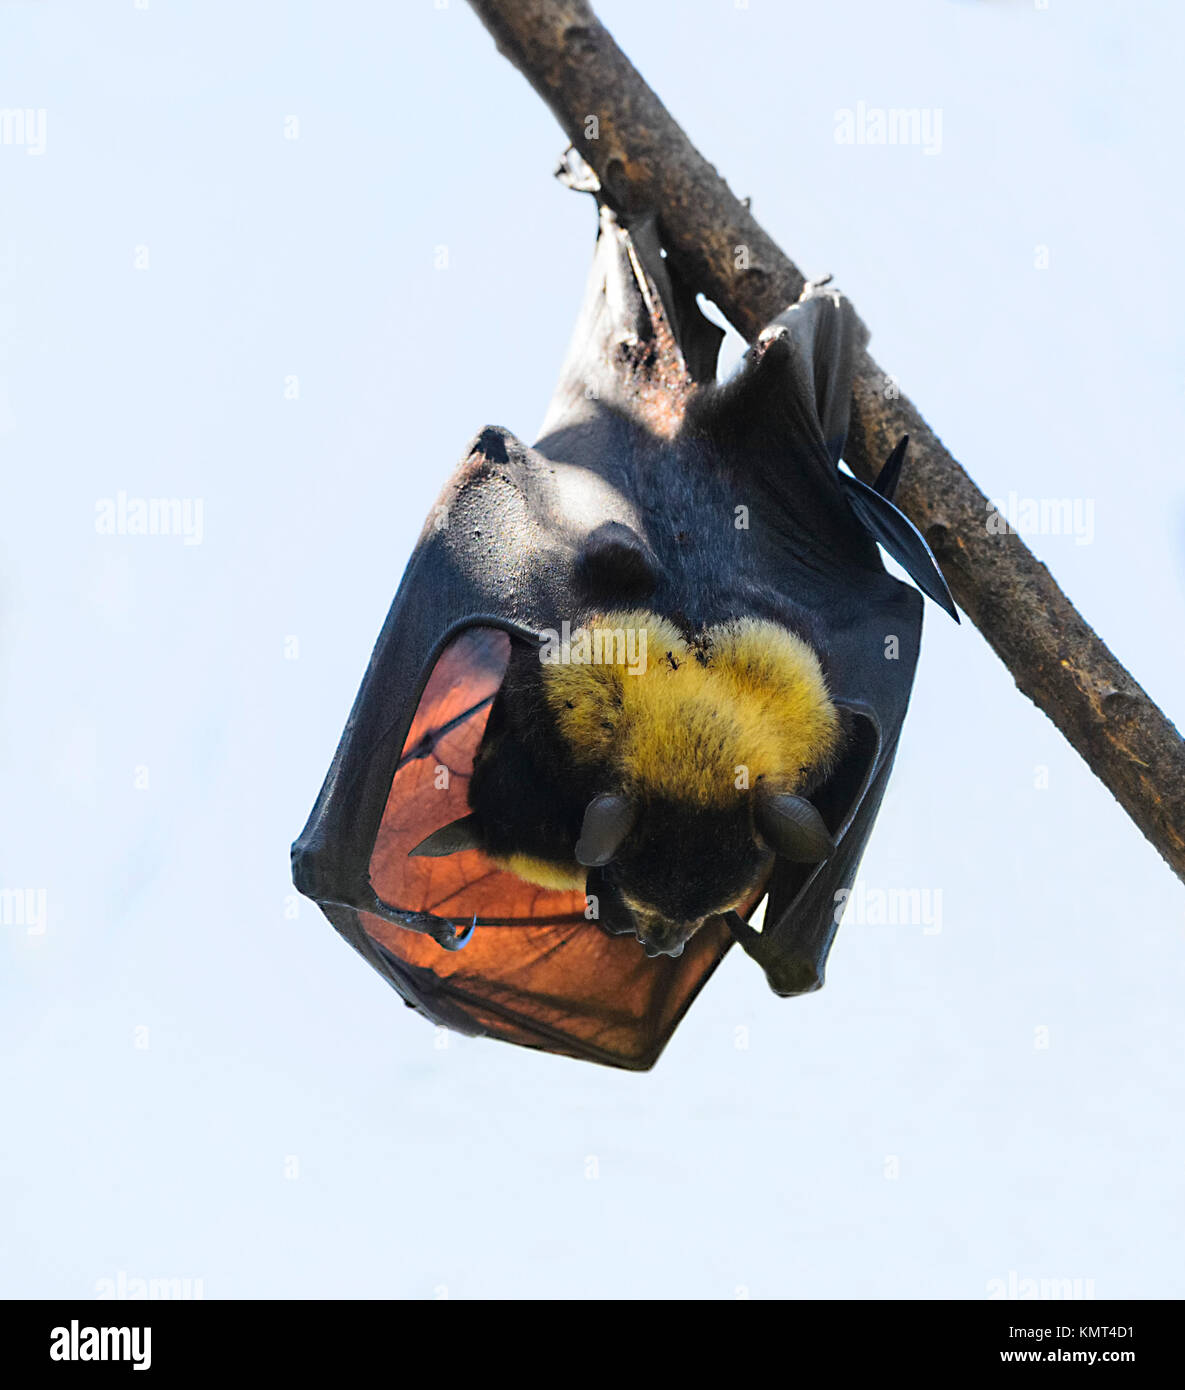 Spectacled flying fox or Spectacled Fruit Bat (Pteropus conspicillatus) with a baby. It is a megabat that lives in Queensland, Australia Stock Photo